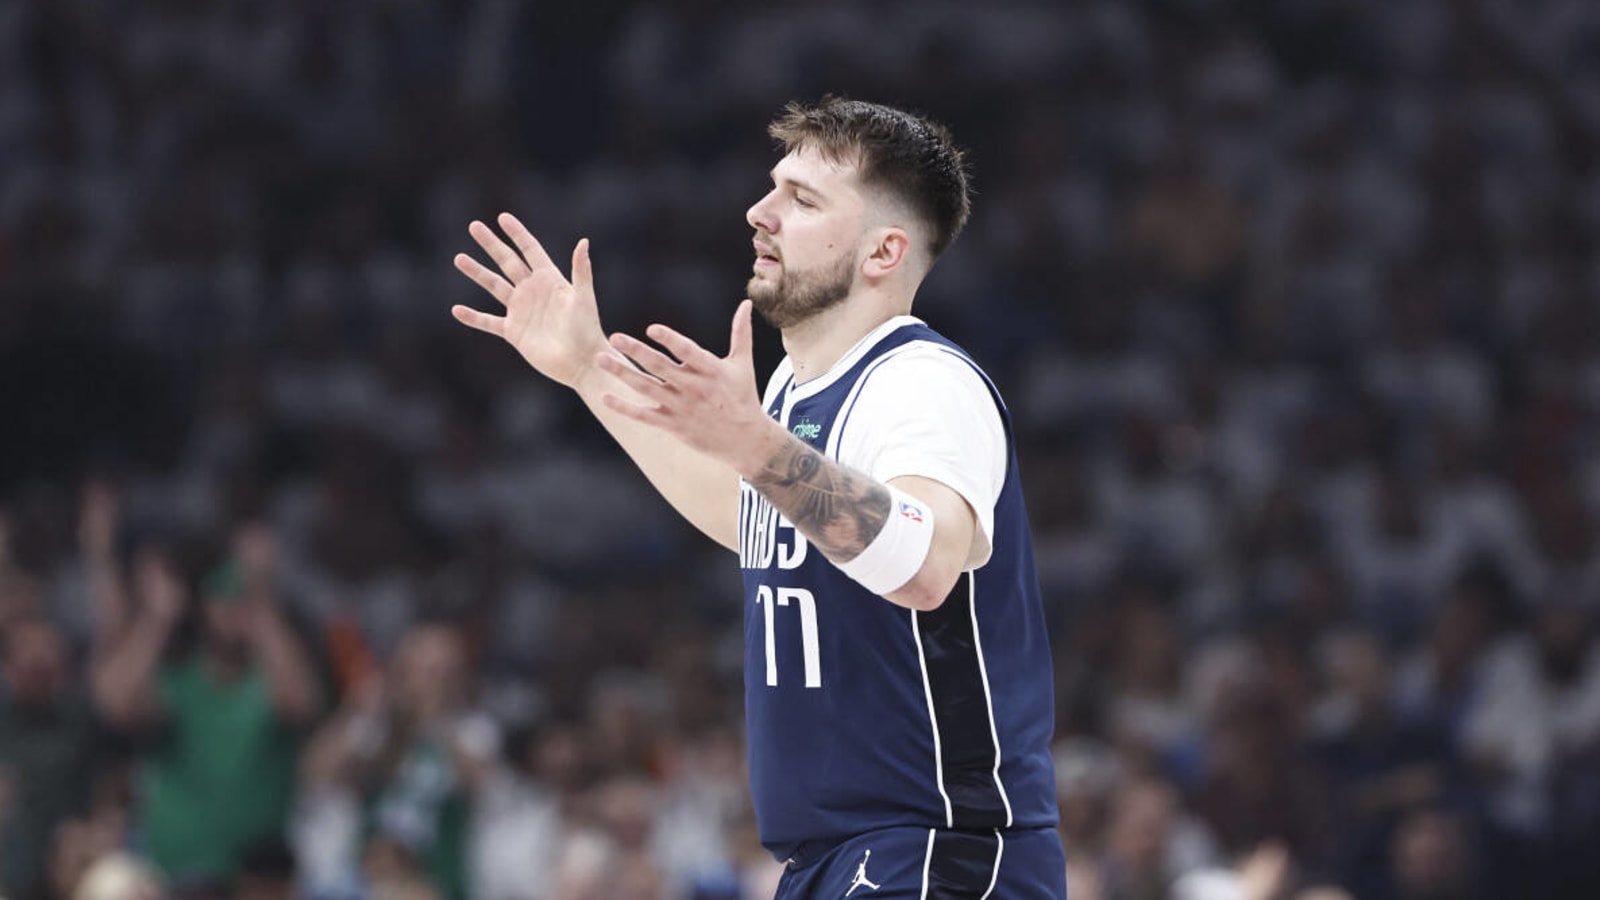 Luka Doncic On Disappointing Performance In Game 1 Loss: 'I Have To Be Better'